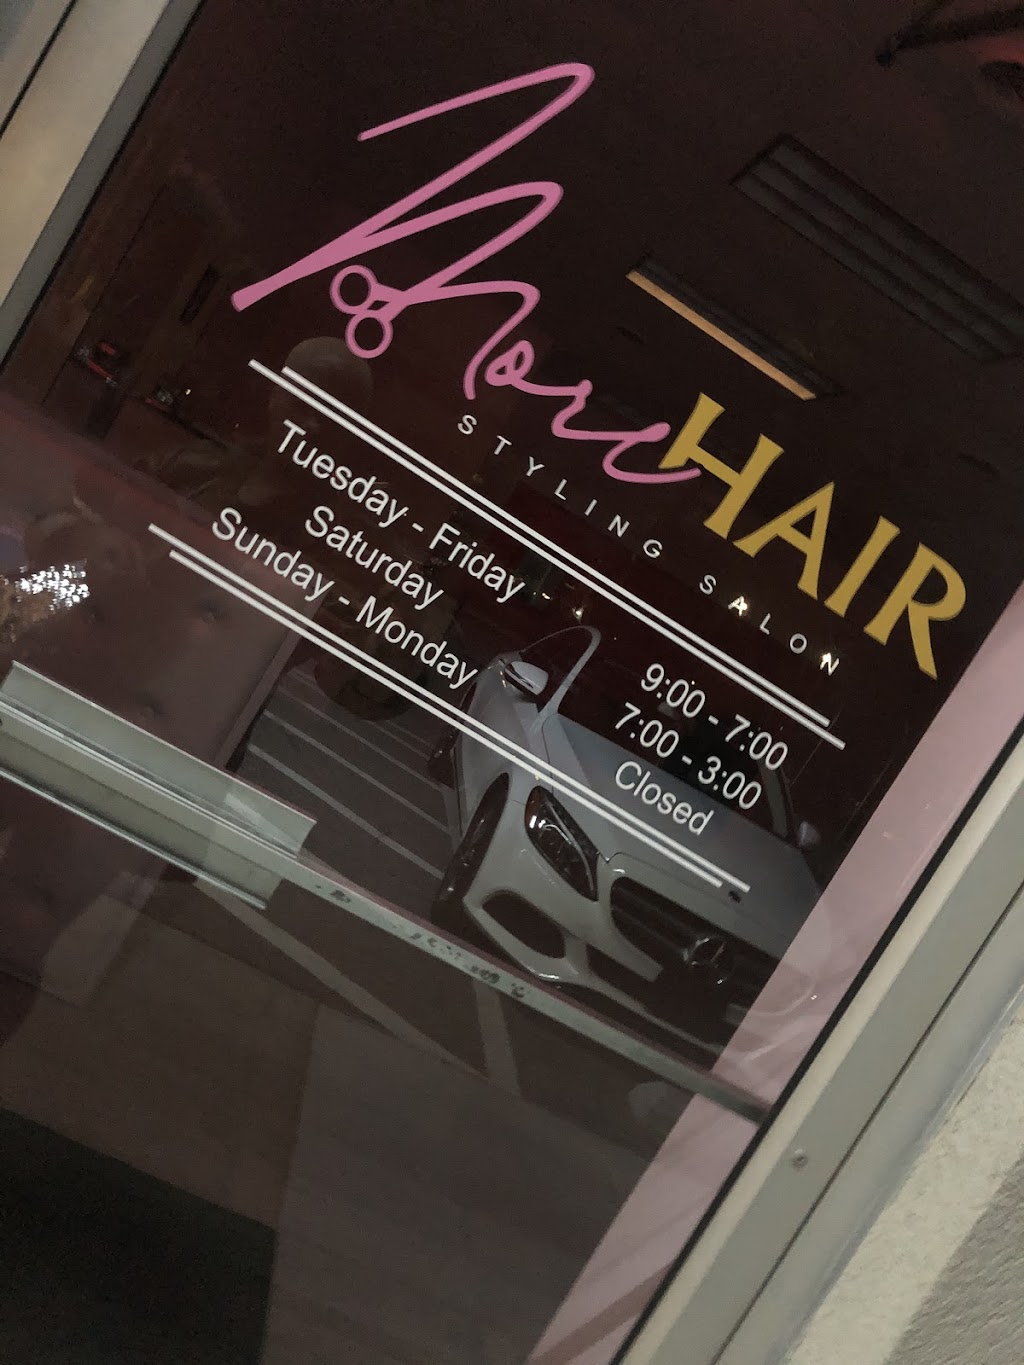 More Hair Styling Salon | 867 S Dupont Hwy, New Castle, DE 19720 | Phone: (302) 261-6113